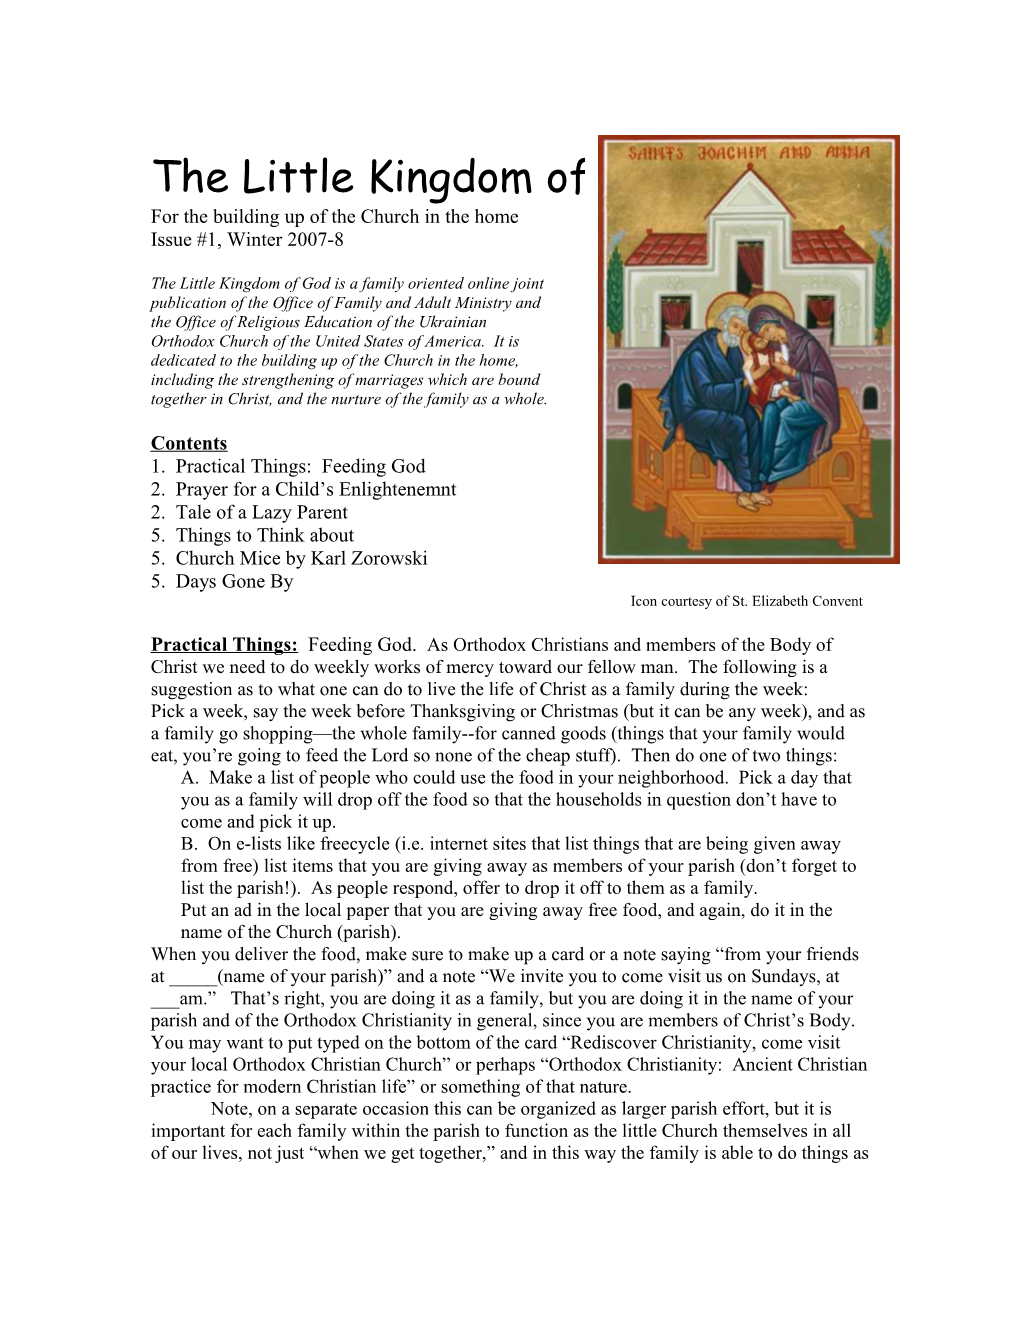 The Little Kingdom of God Is a Publication of the Office of Family and Adult Ministry, Fr